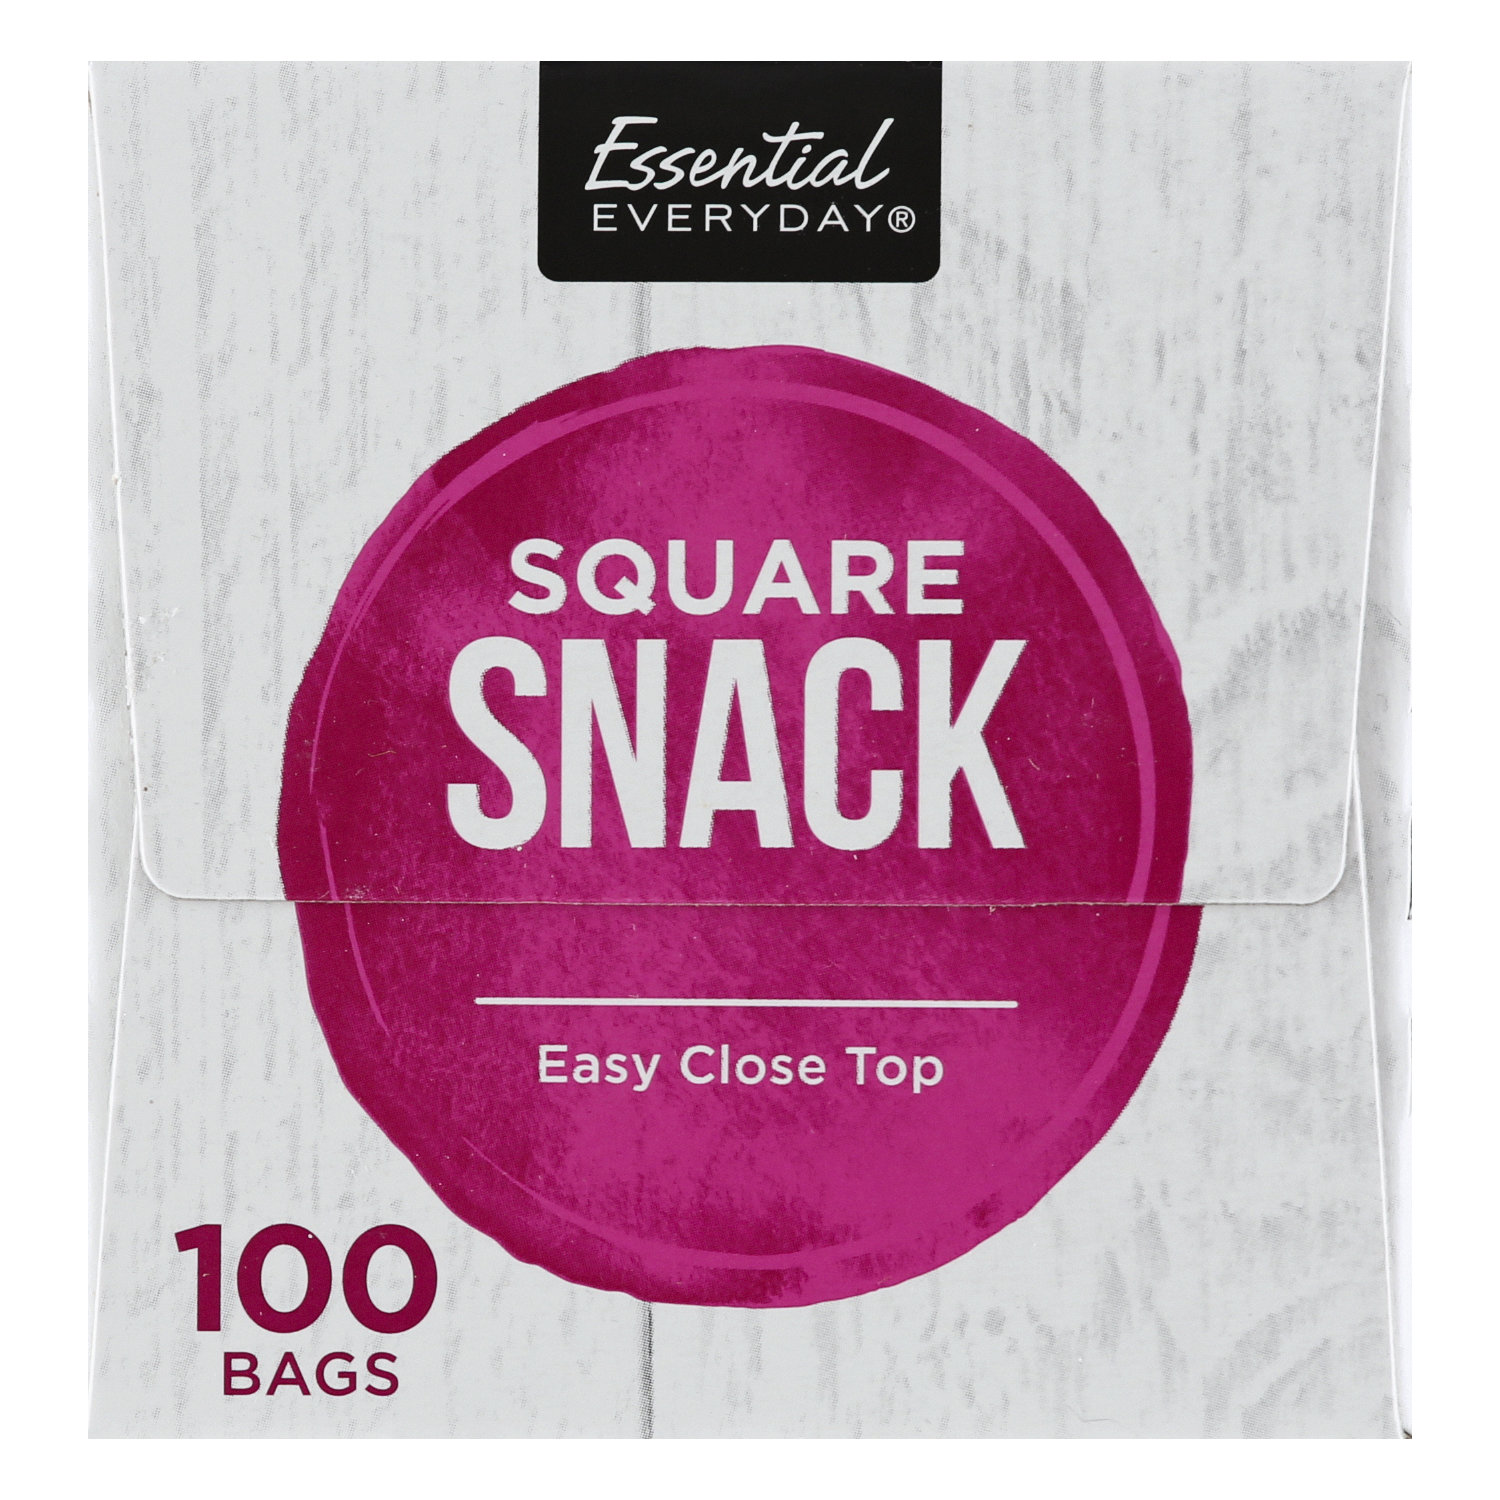 Essential Everyday Snack Bags, Reclosable, Square, Plastic Bags